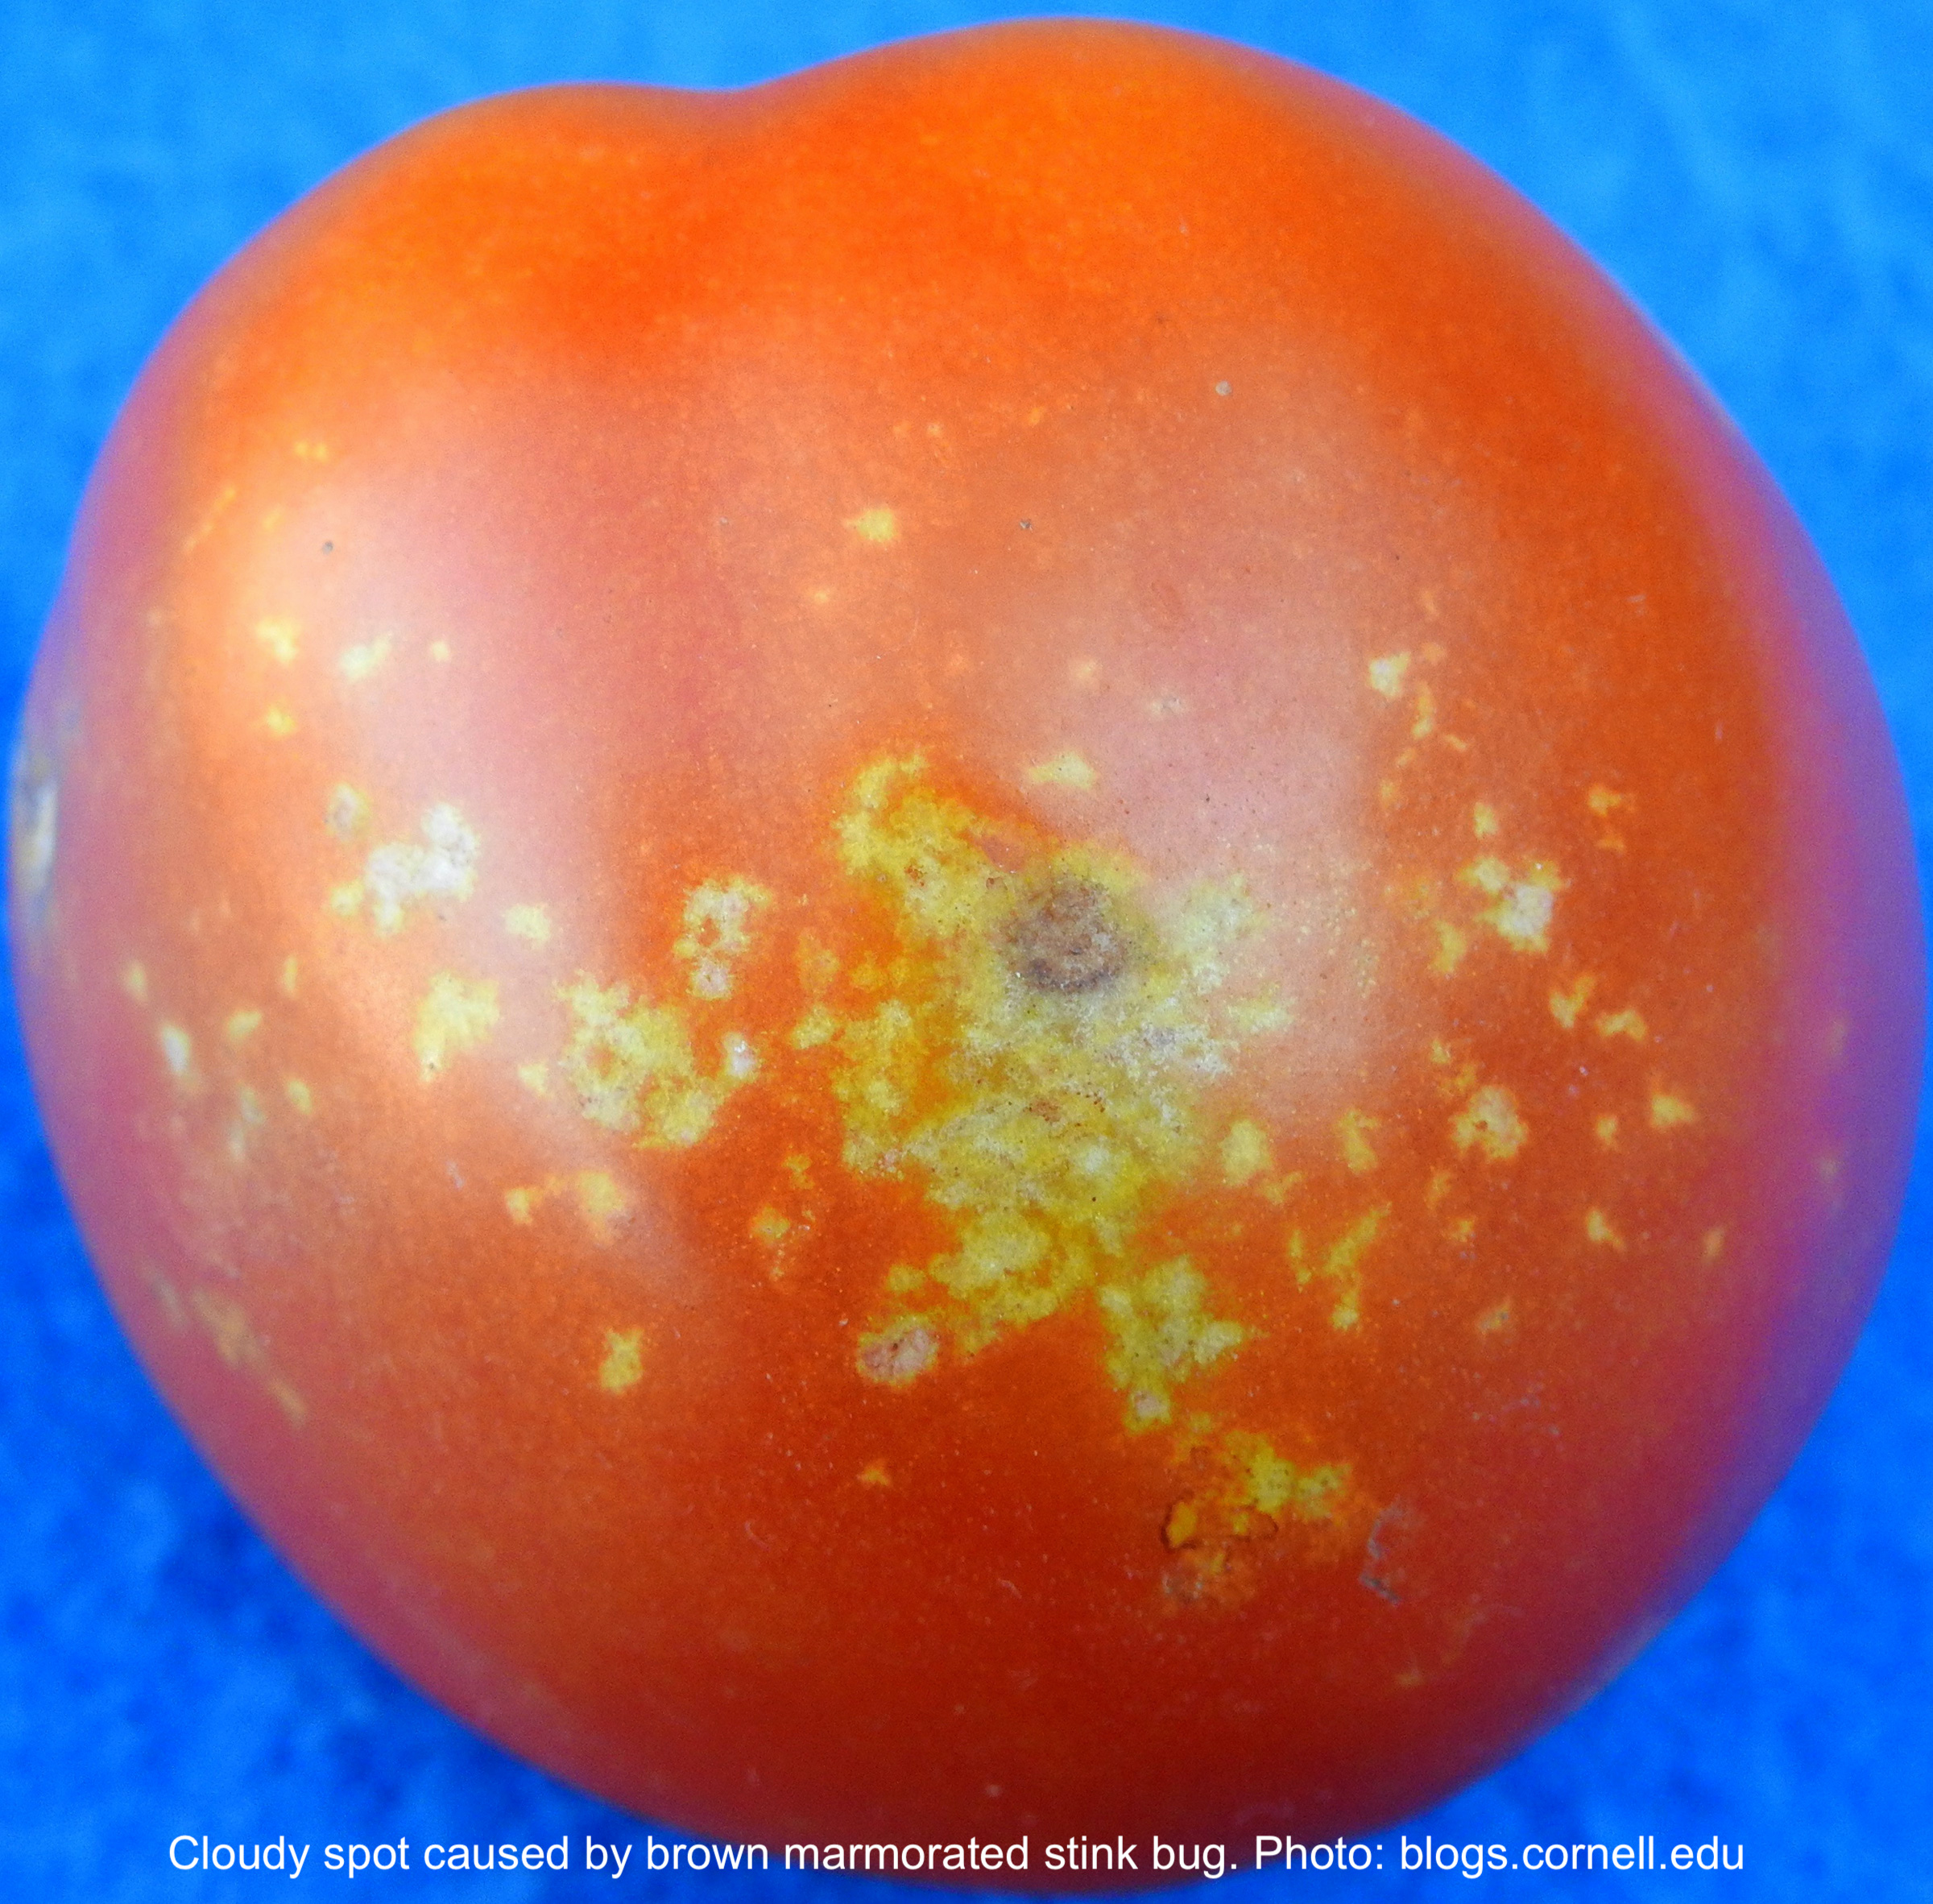 Tomato speckled with yellow spots.